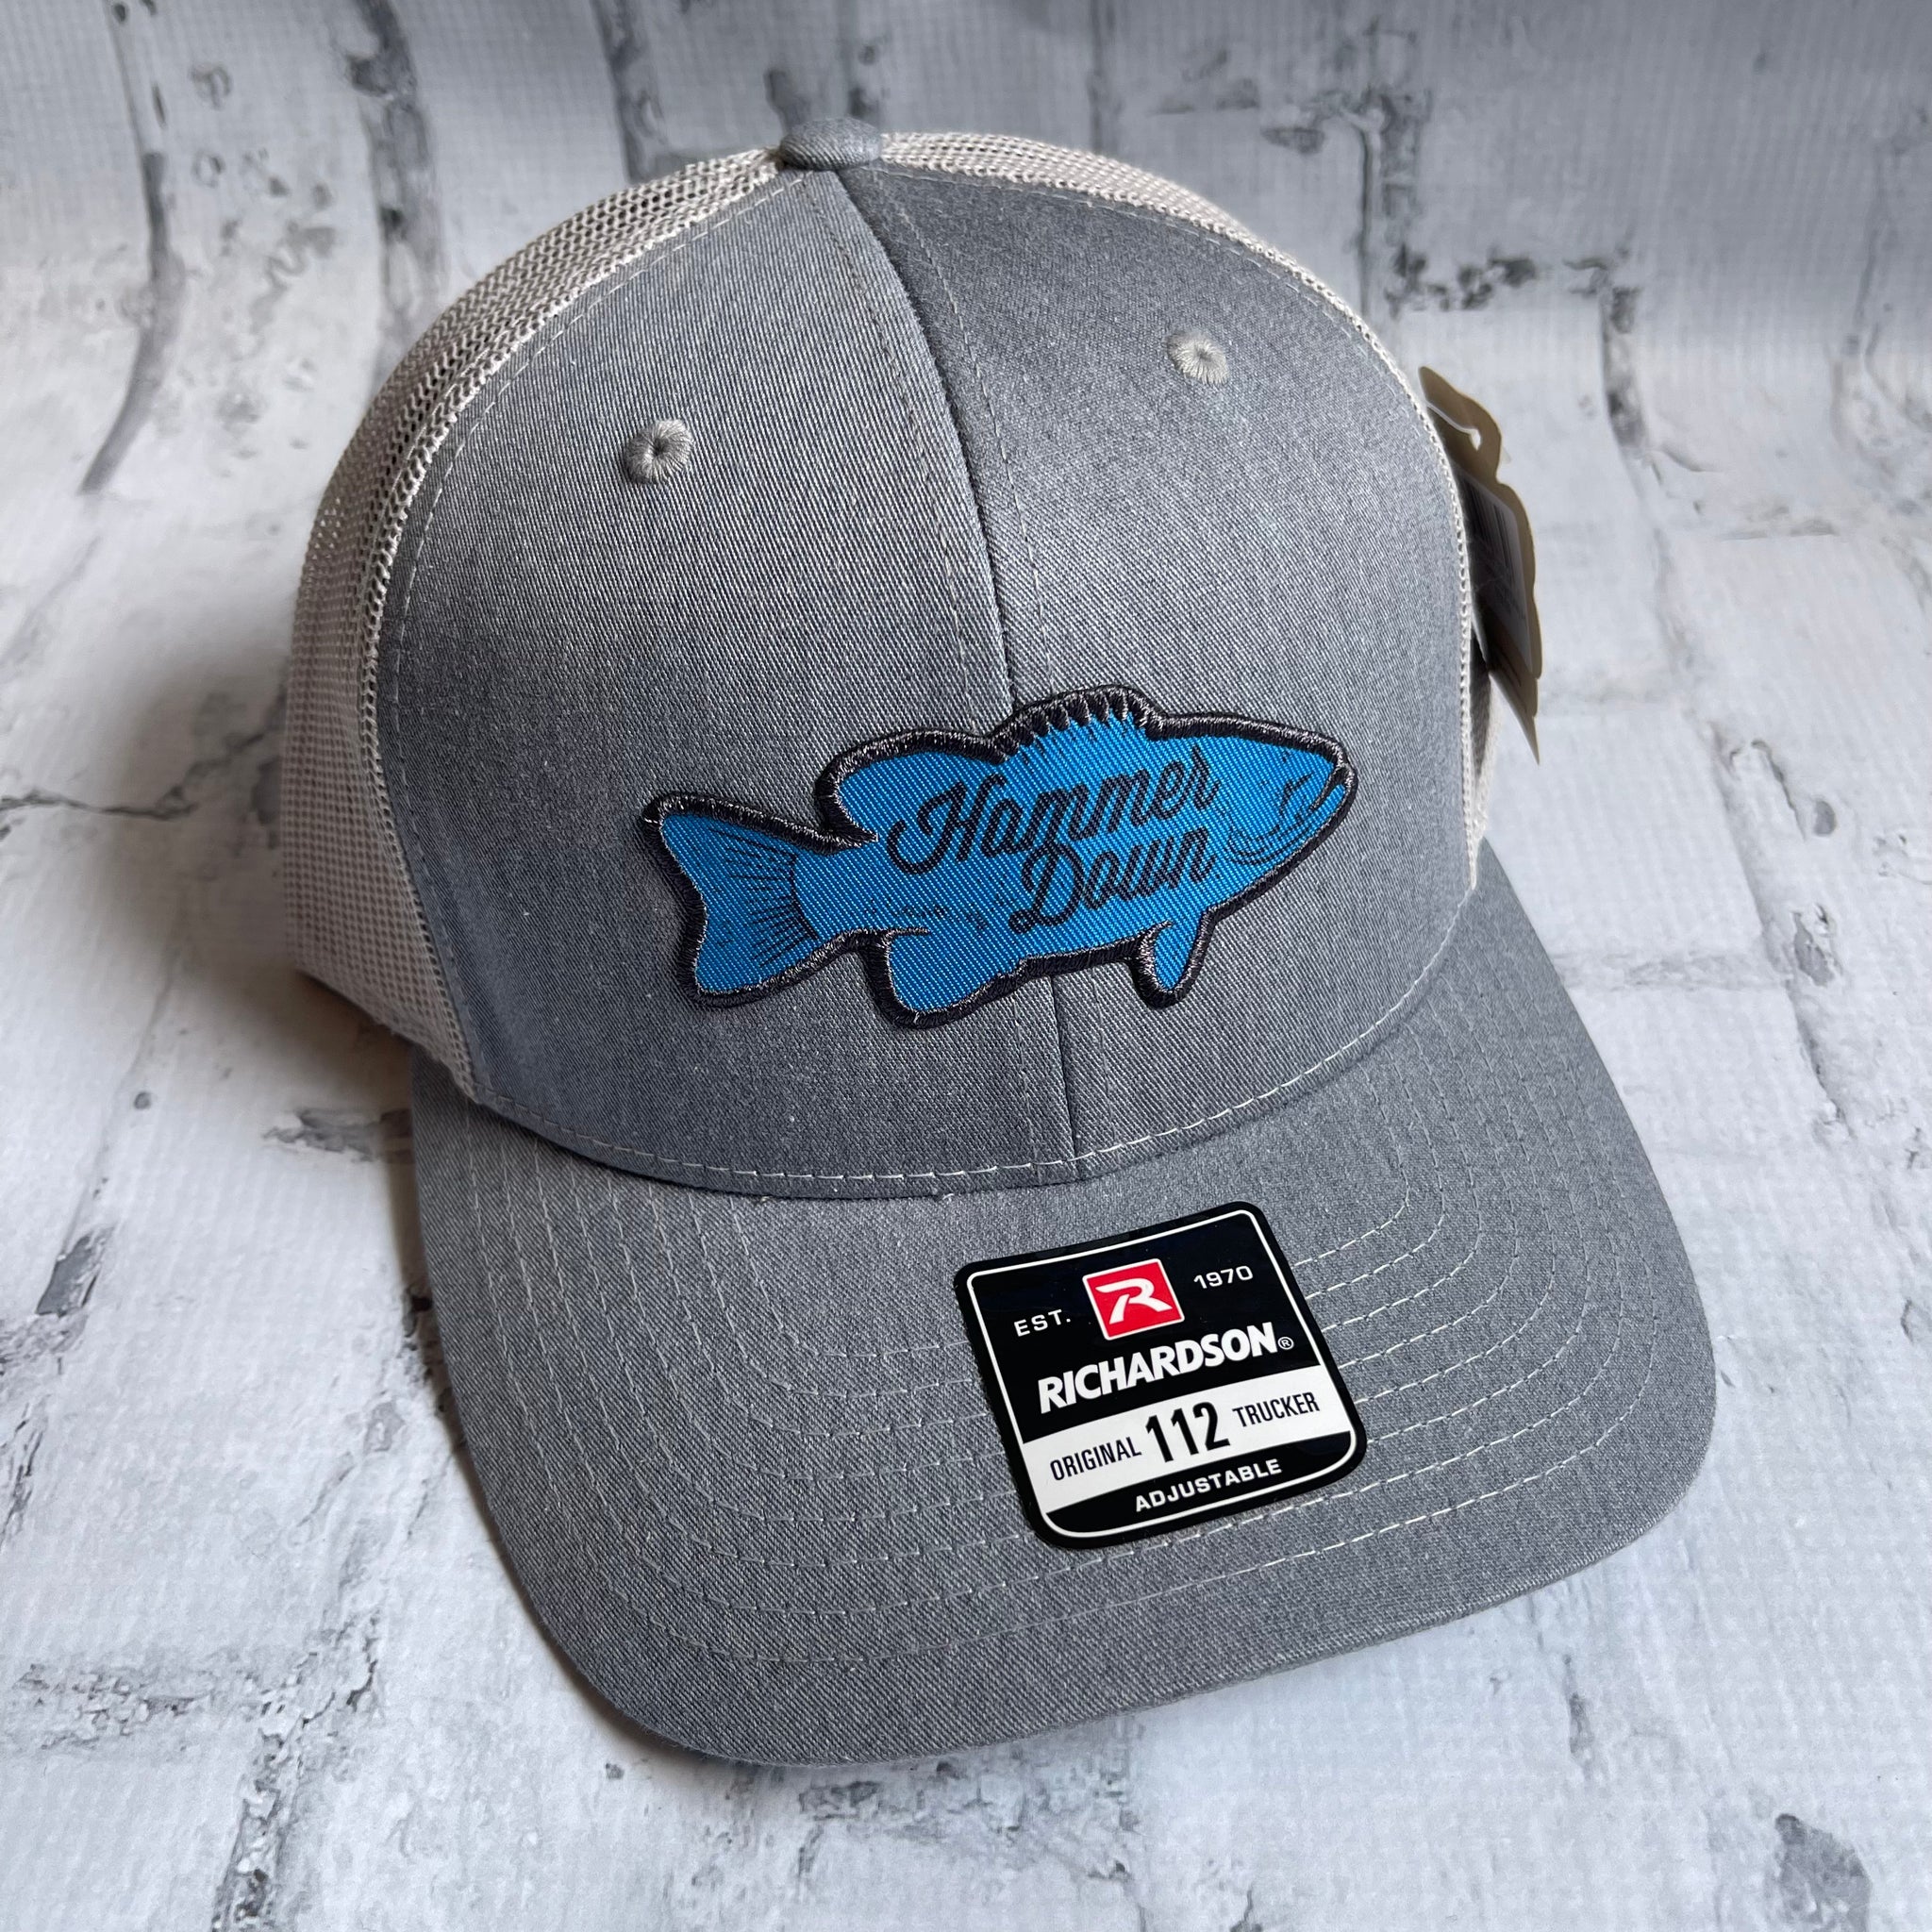 Hammer Down "HD Bass" Hat - Heather Gray with Leather Patch - Southern Charm "Shop The Charm"